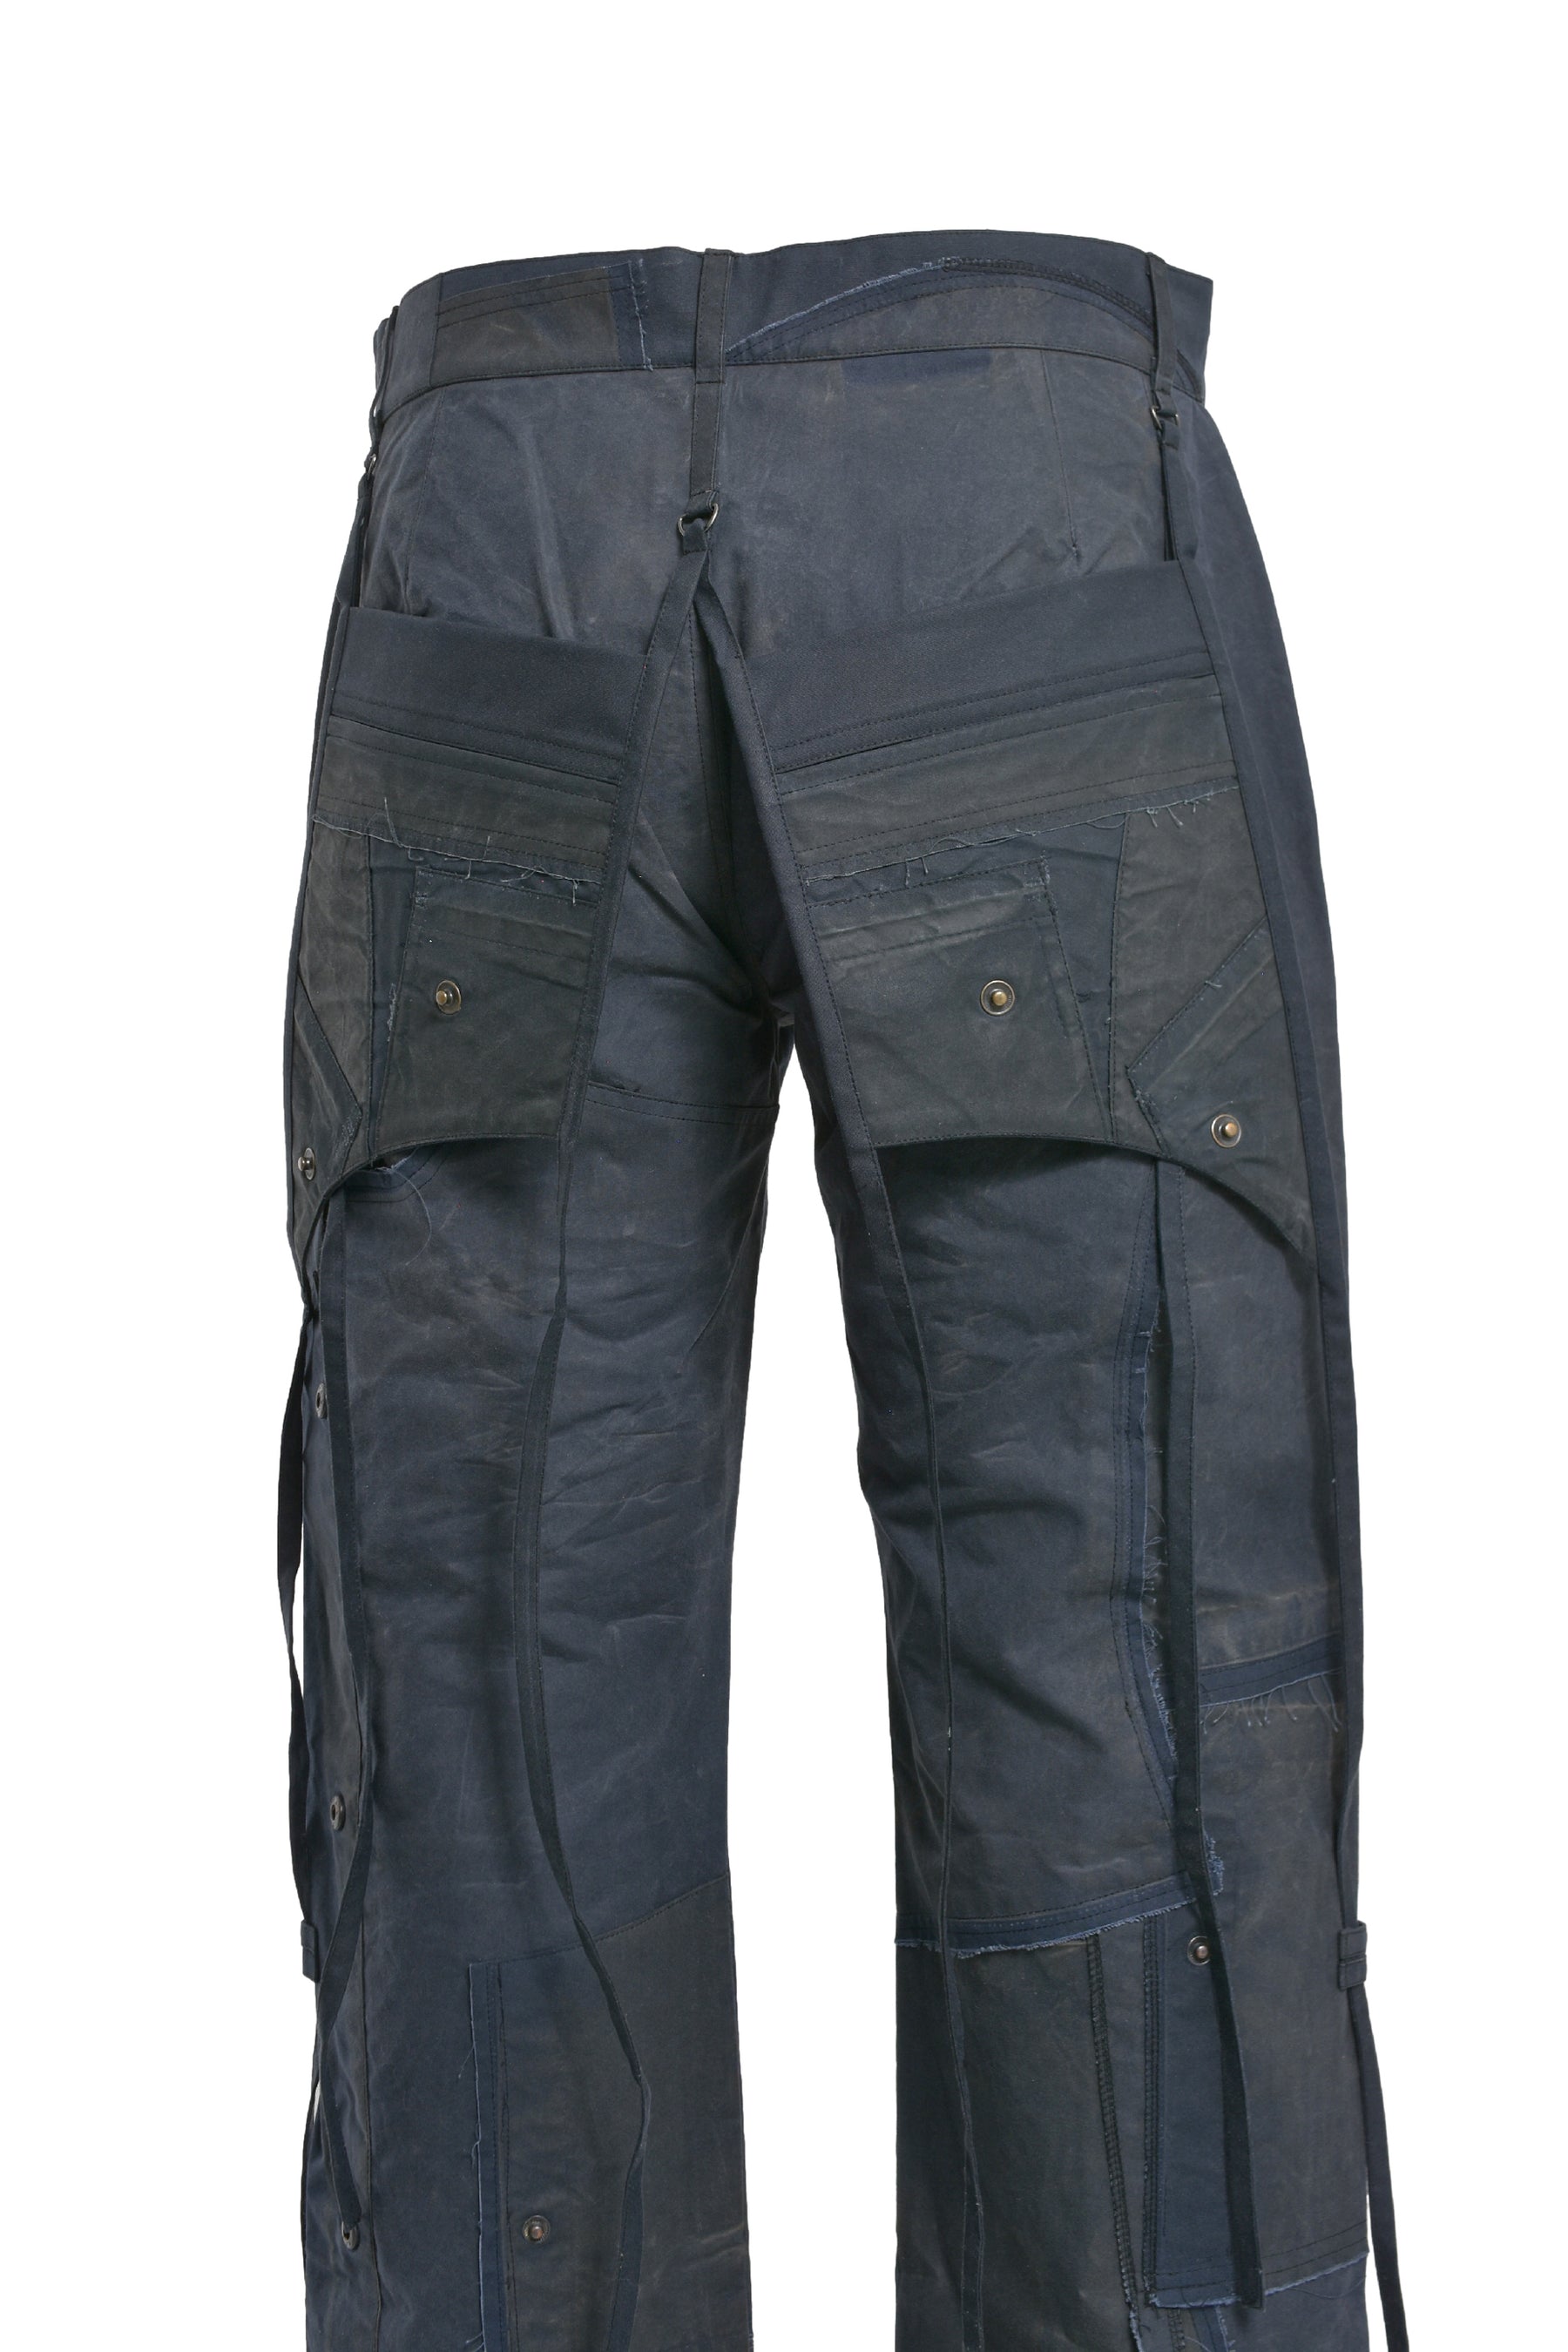 PATCHWORK DANFORTH ANCHOR PANTS / GRY